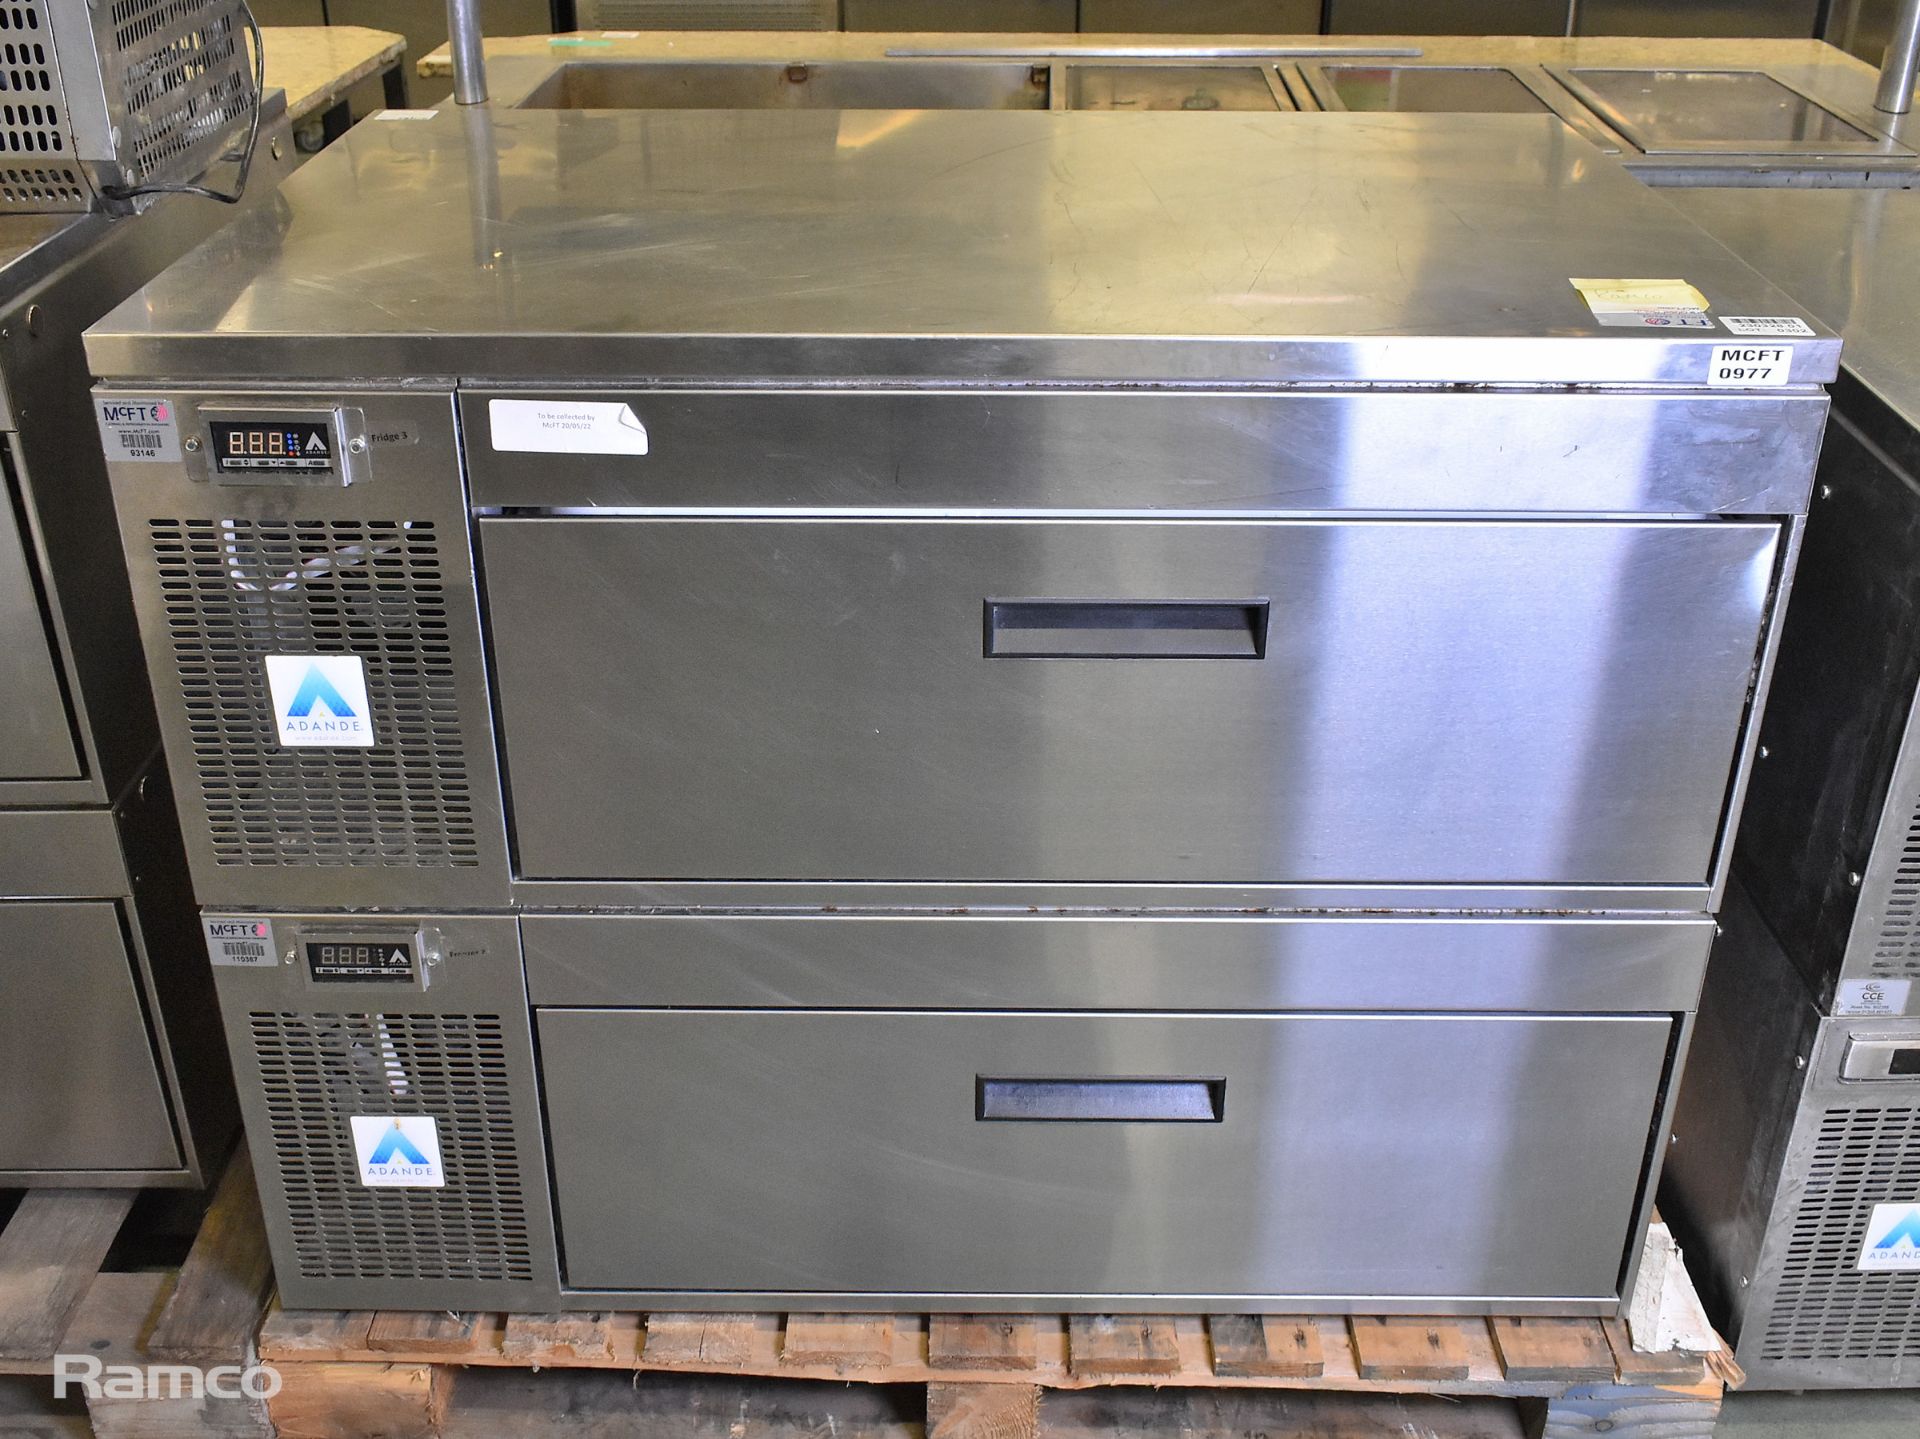 Adande stainless steel double drawer counter fridge - 240V - L110 x W70 x H92cm